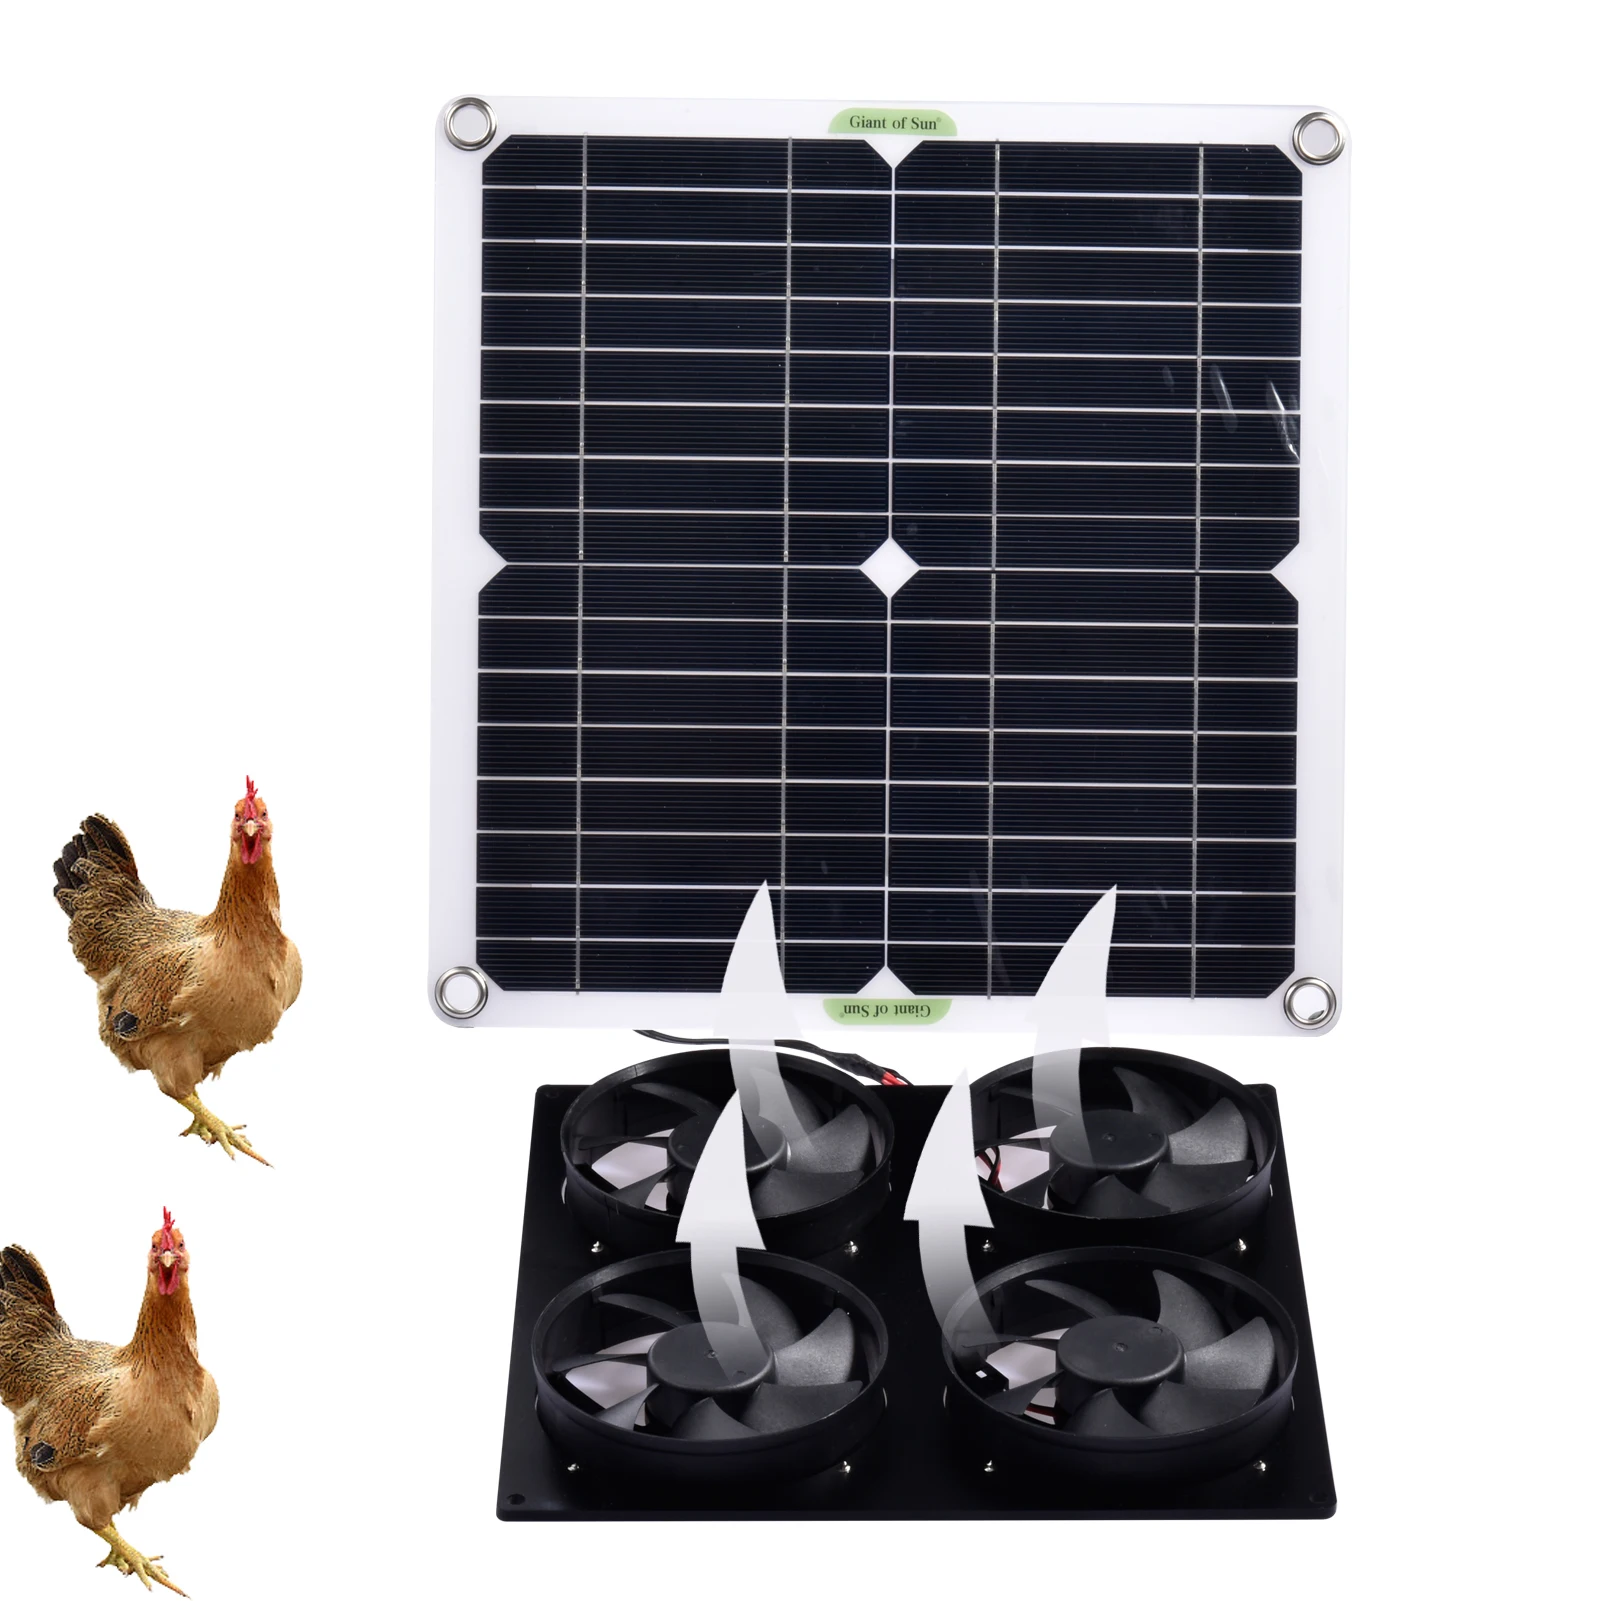 

4 Solar Panel Fan Kit 100W Solar Greenhouse Fans Outdoor Solar Panel Powered Fans With Cable For Cooling And Ventilation Easy